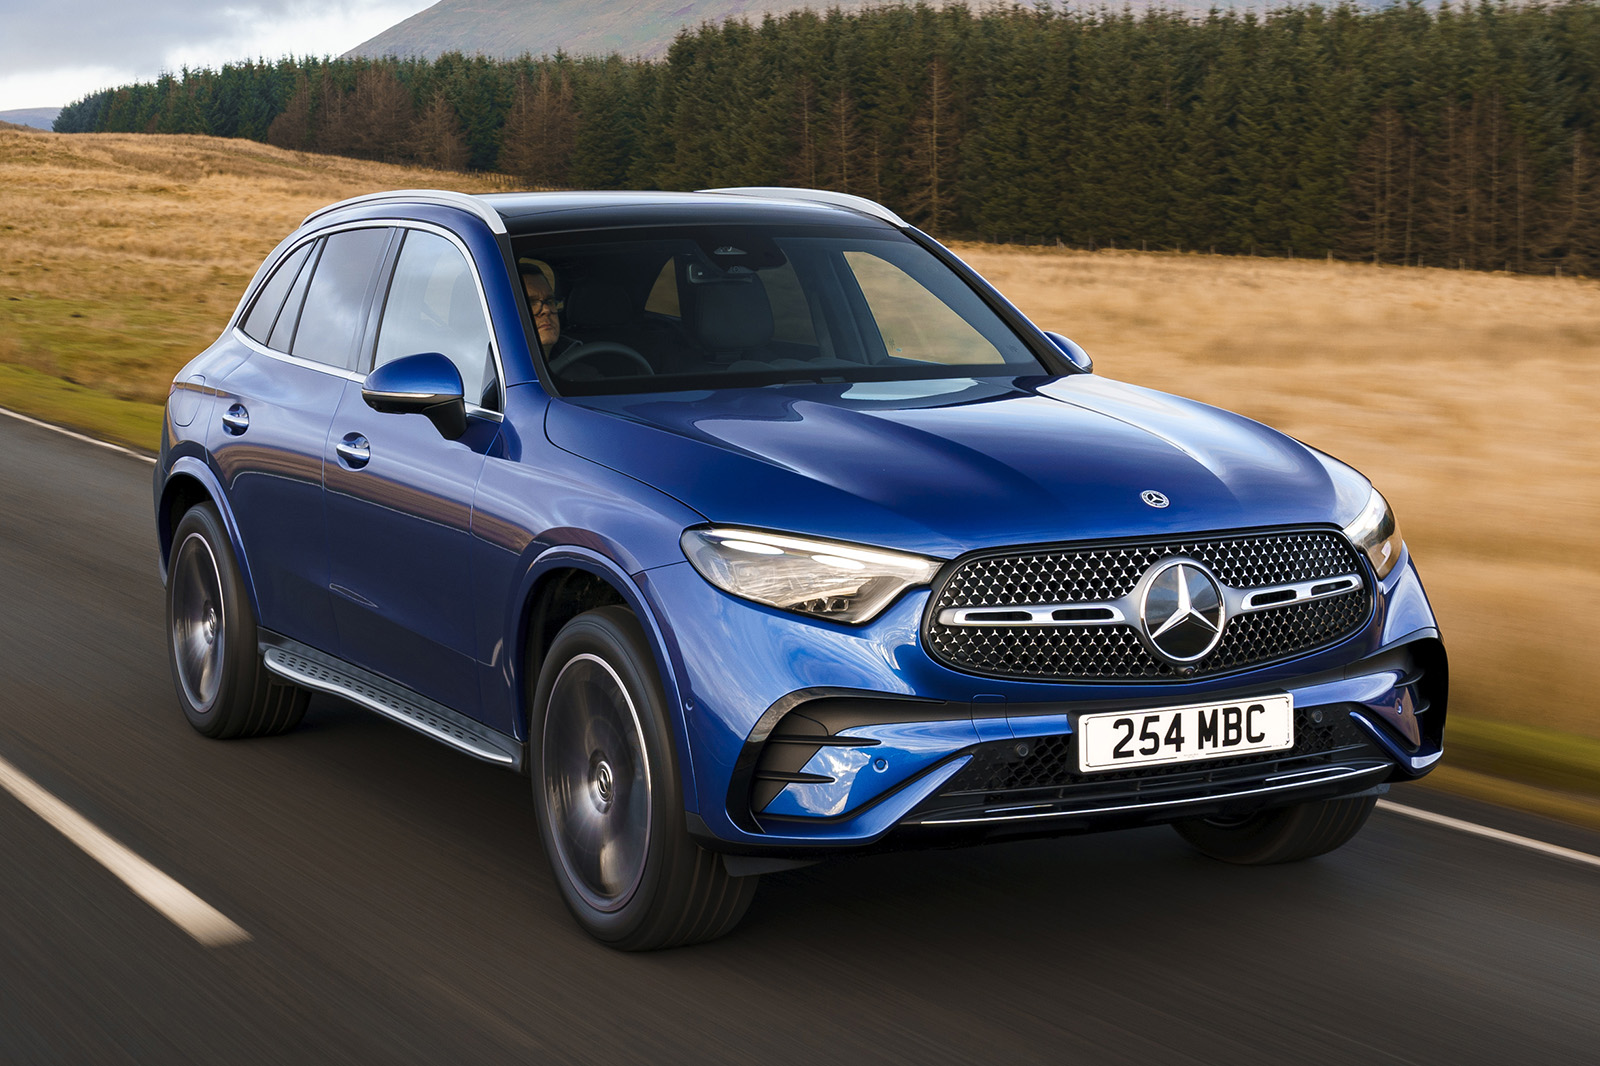 https://www.autocar.co.uk/sites/autocar.co.uk/files/images/car-reviews/first-drives/legacy/mercedes-glc-300e-2023-01-frnt-tracking_0.jpg